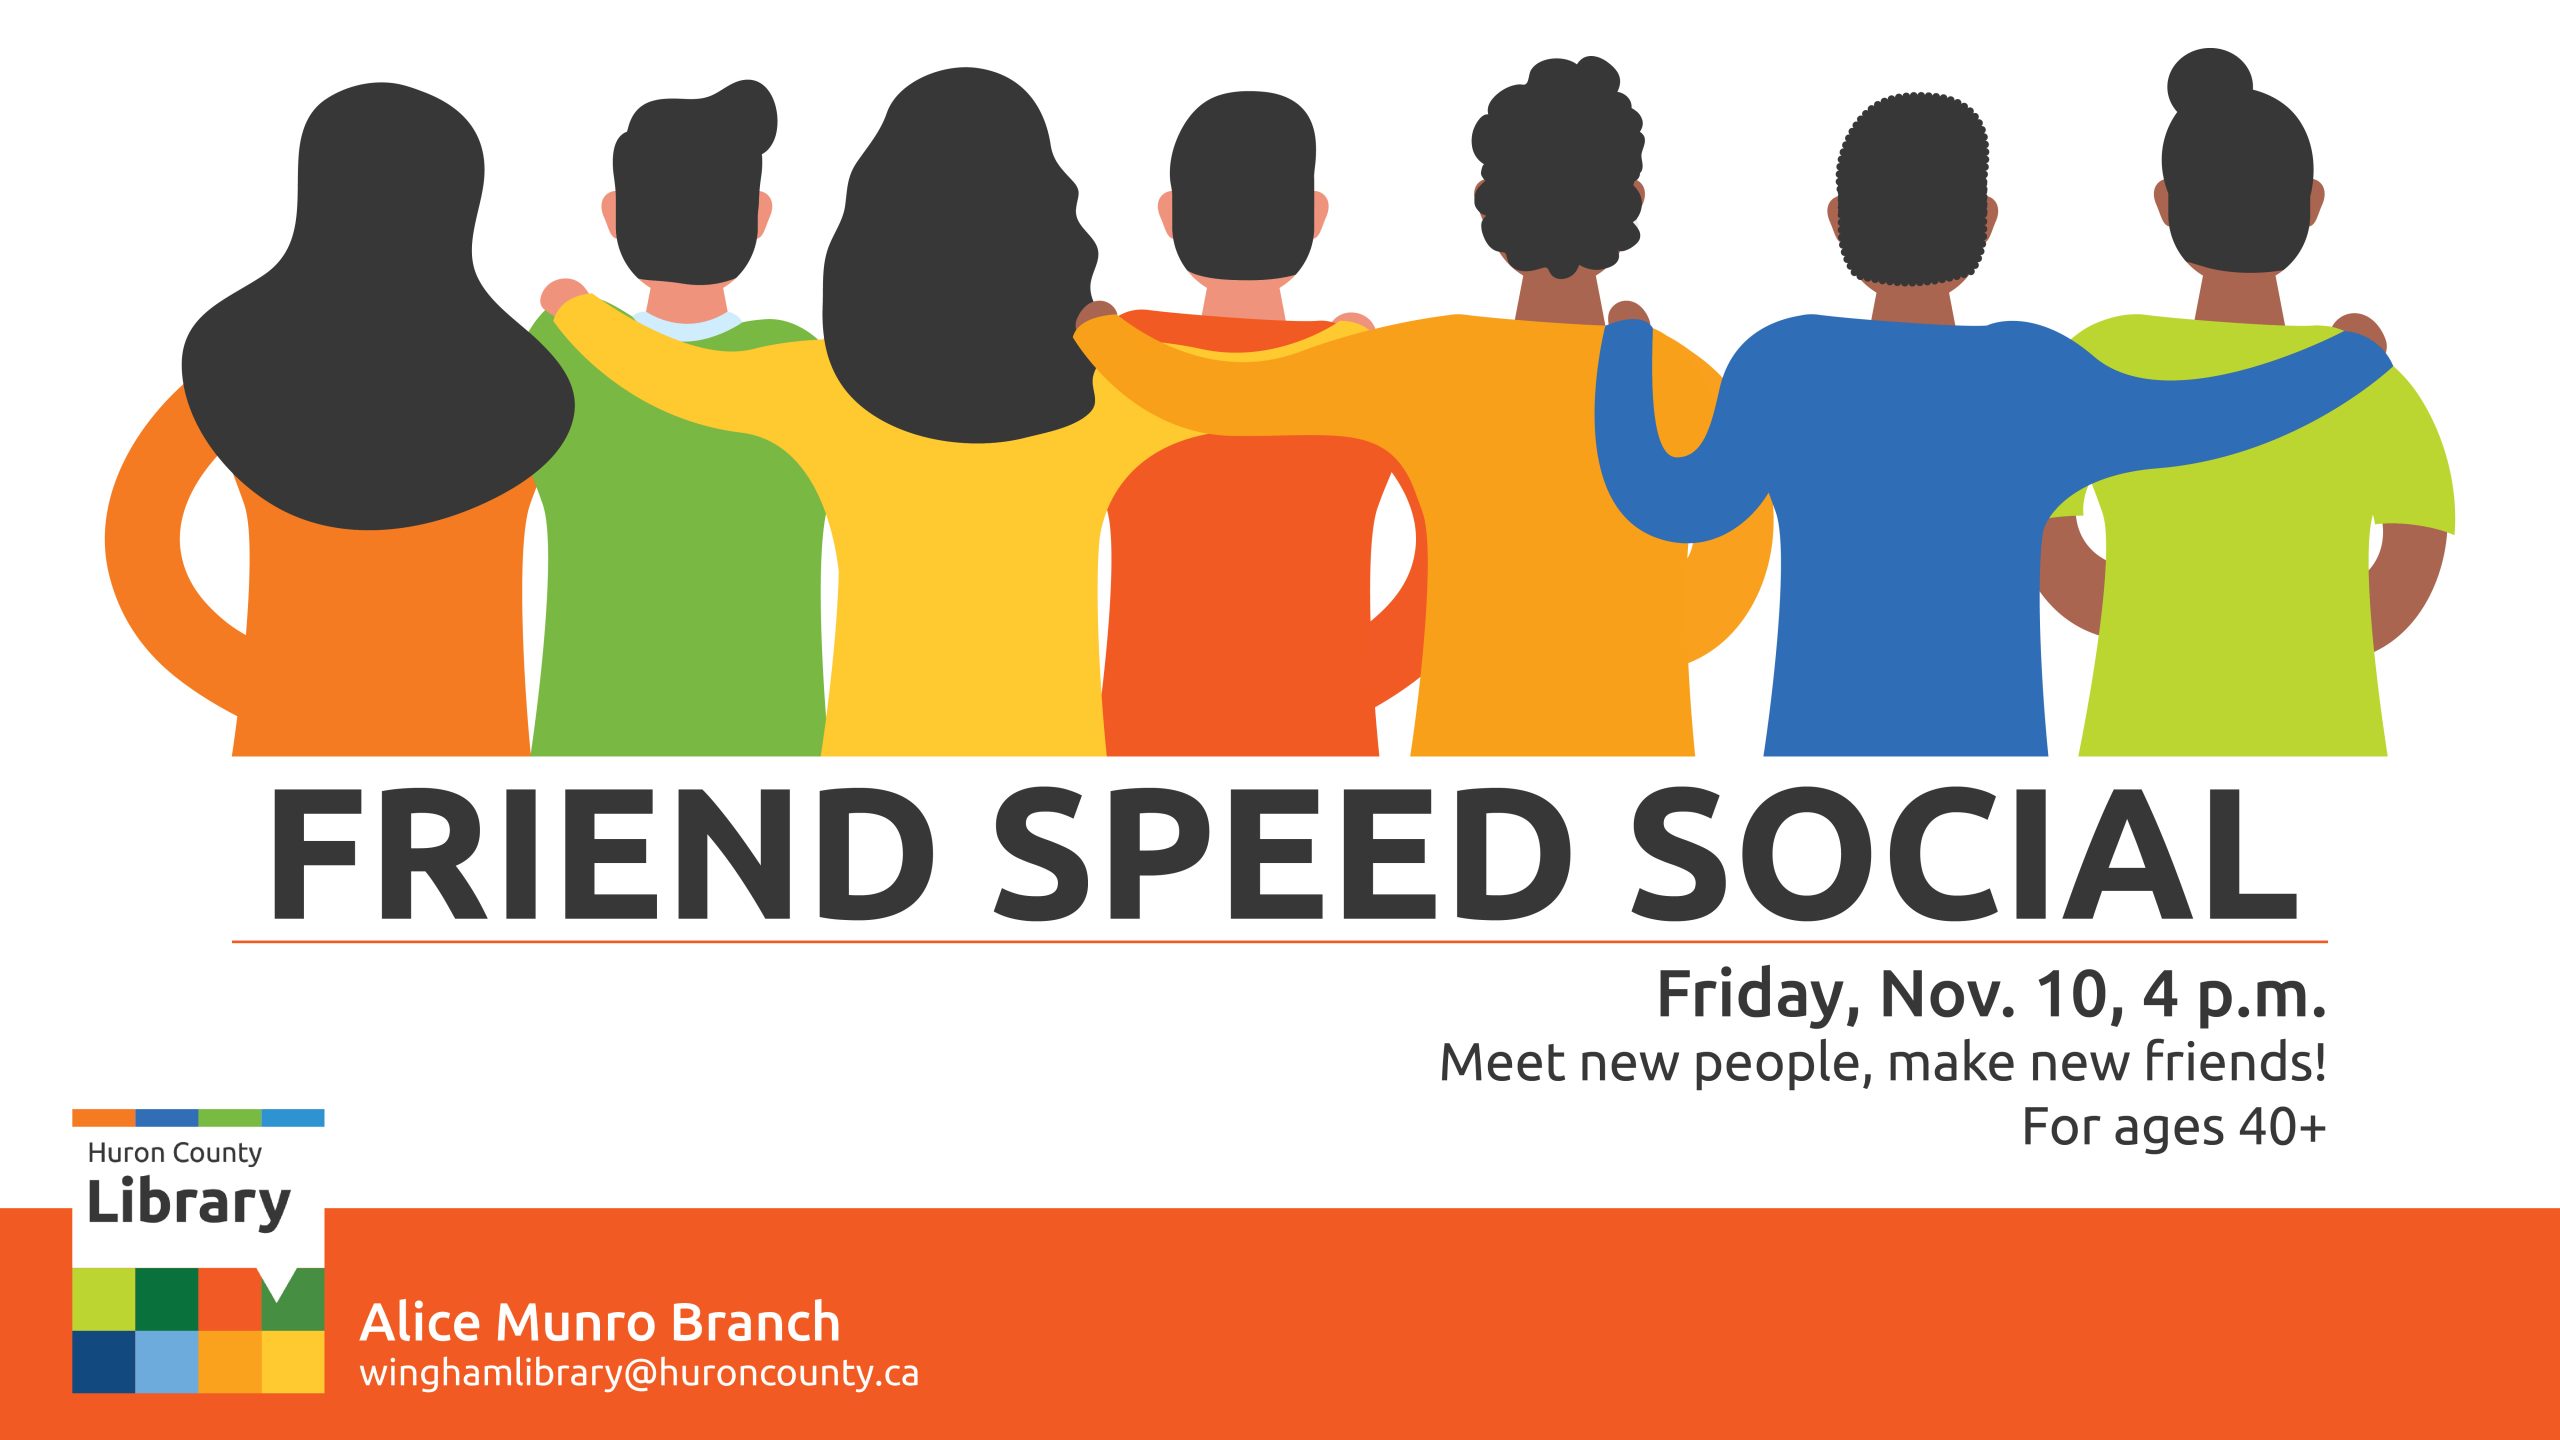 Illustration of friends with their arms around each other with text promoting friend speed social event at Alice Munro Branch, Wingham